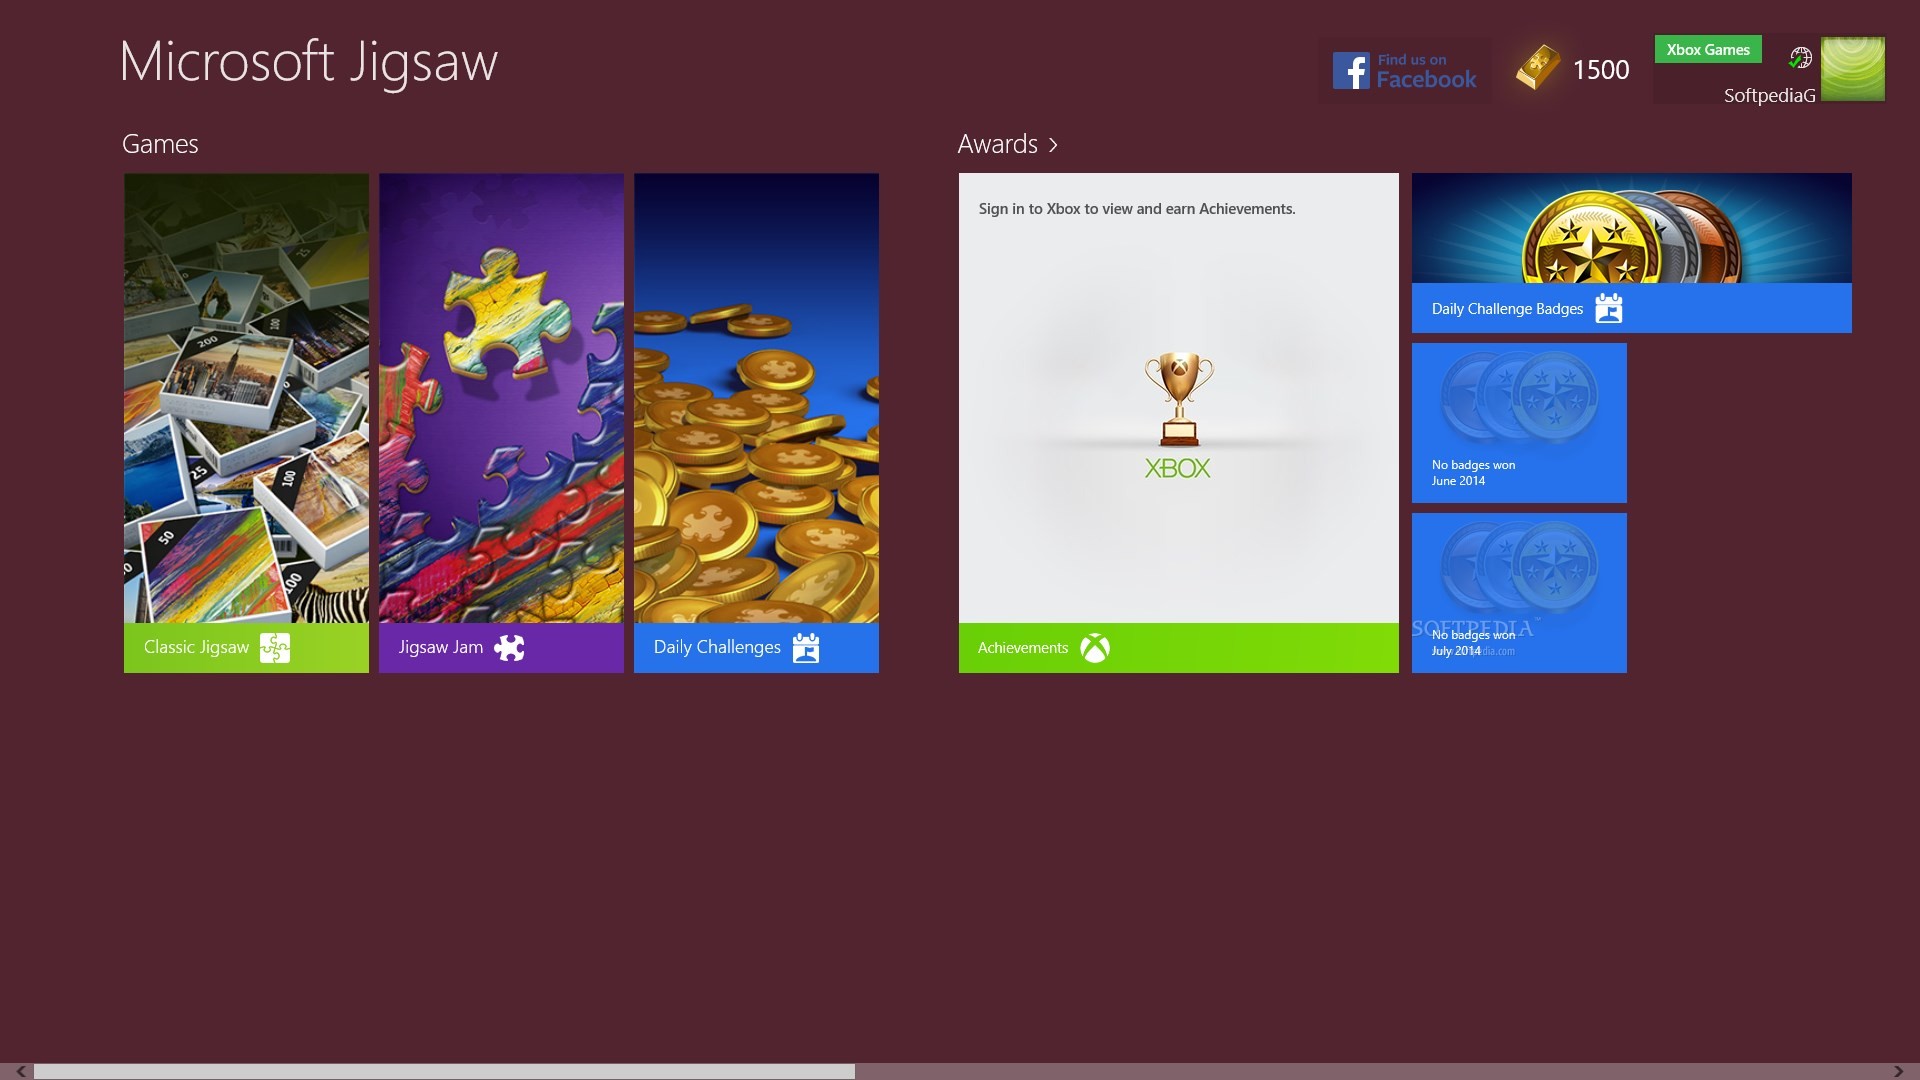 microsoft jigsaw will not download collections windows 8.1